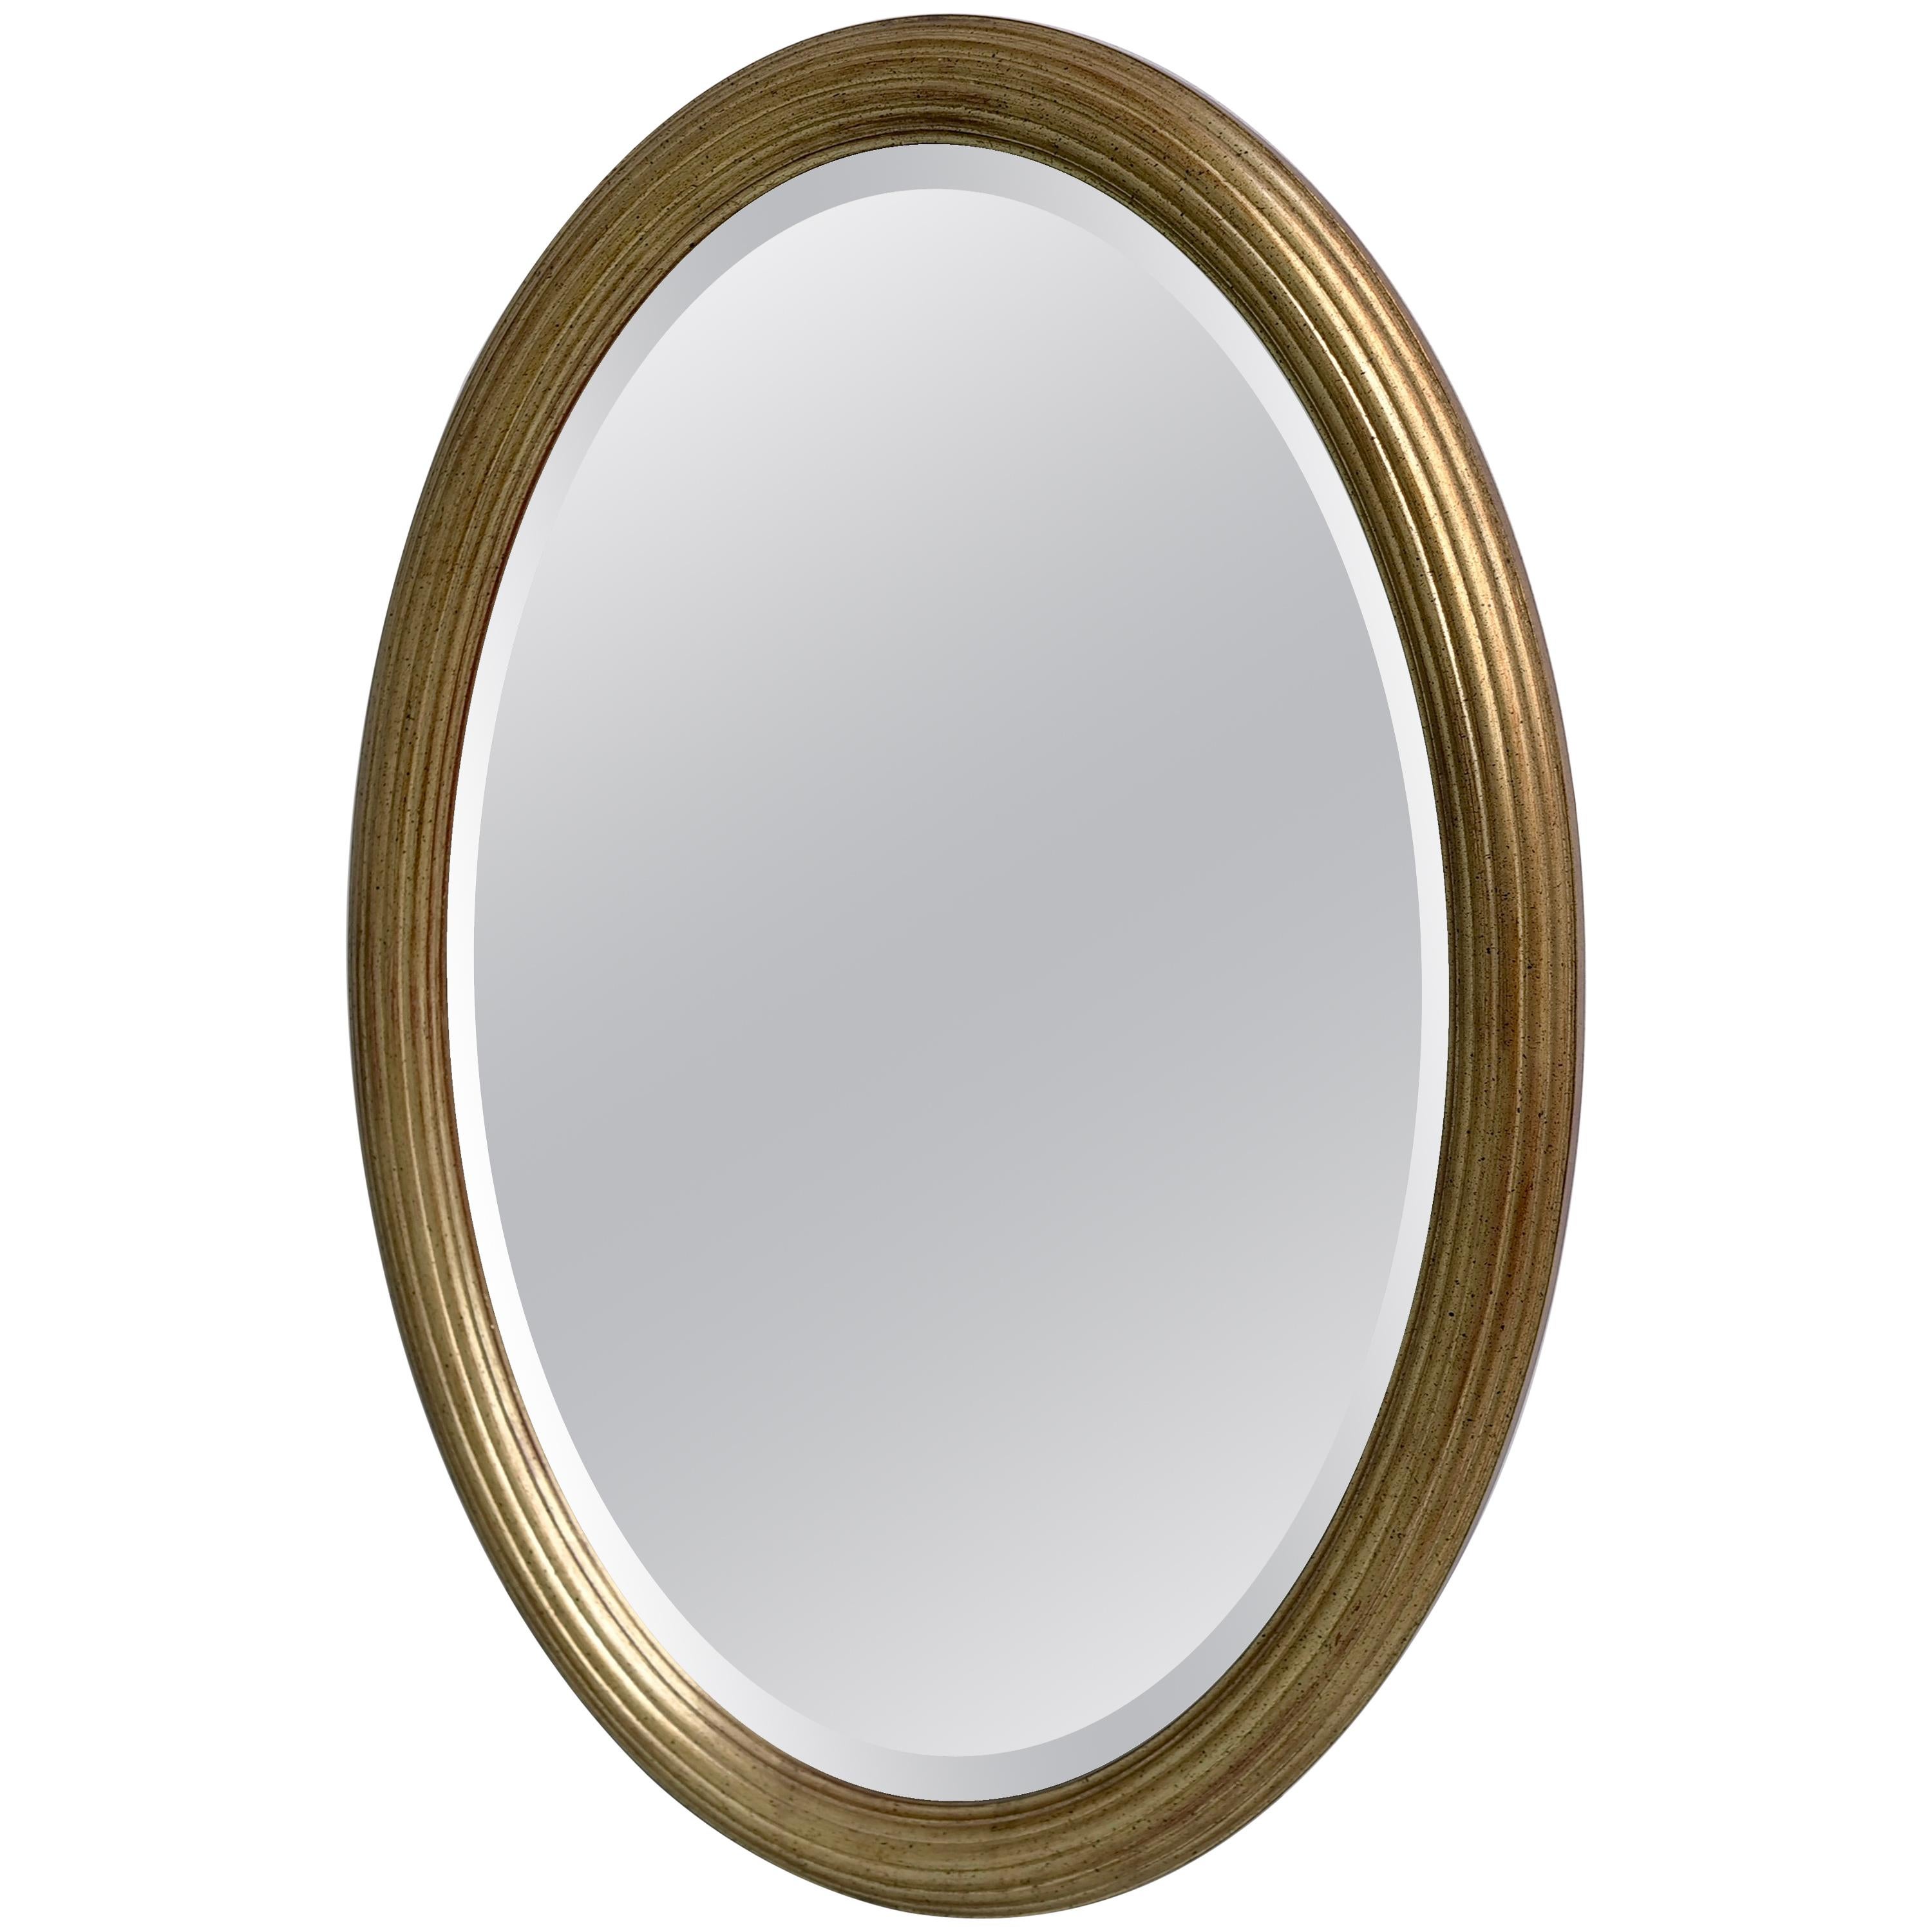 Classic French Oval Mirror in Gold Color, 1960s